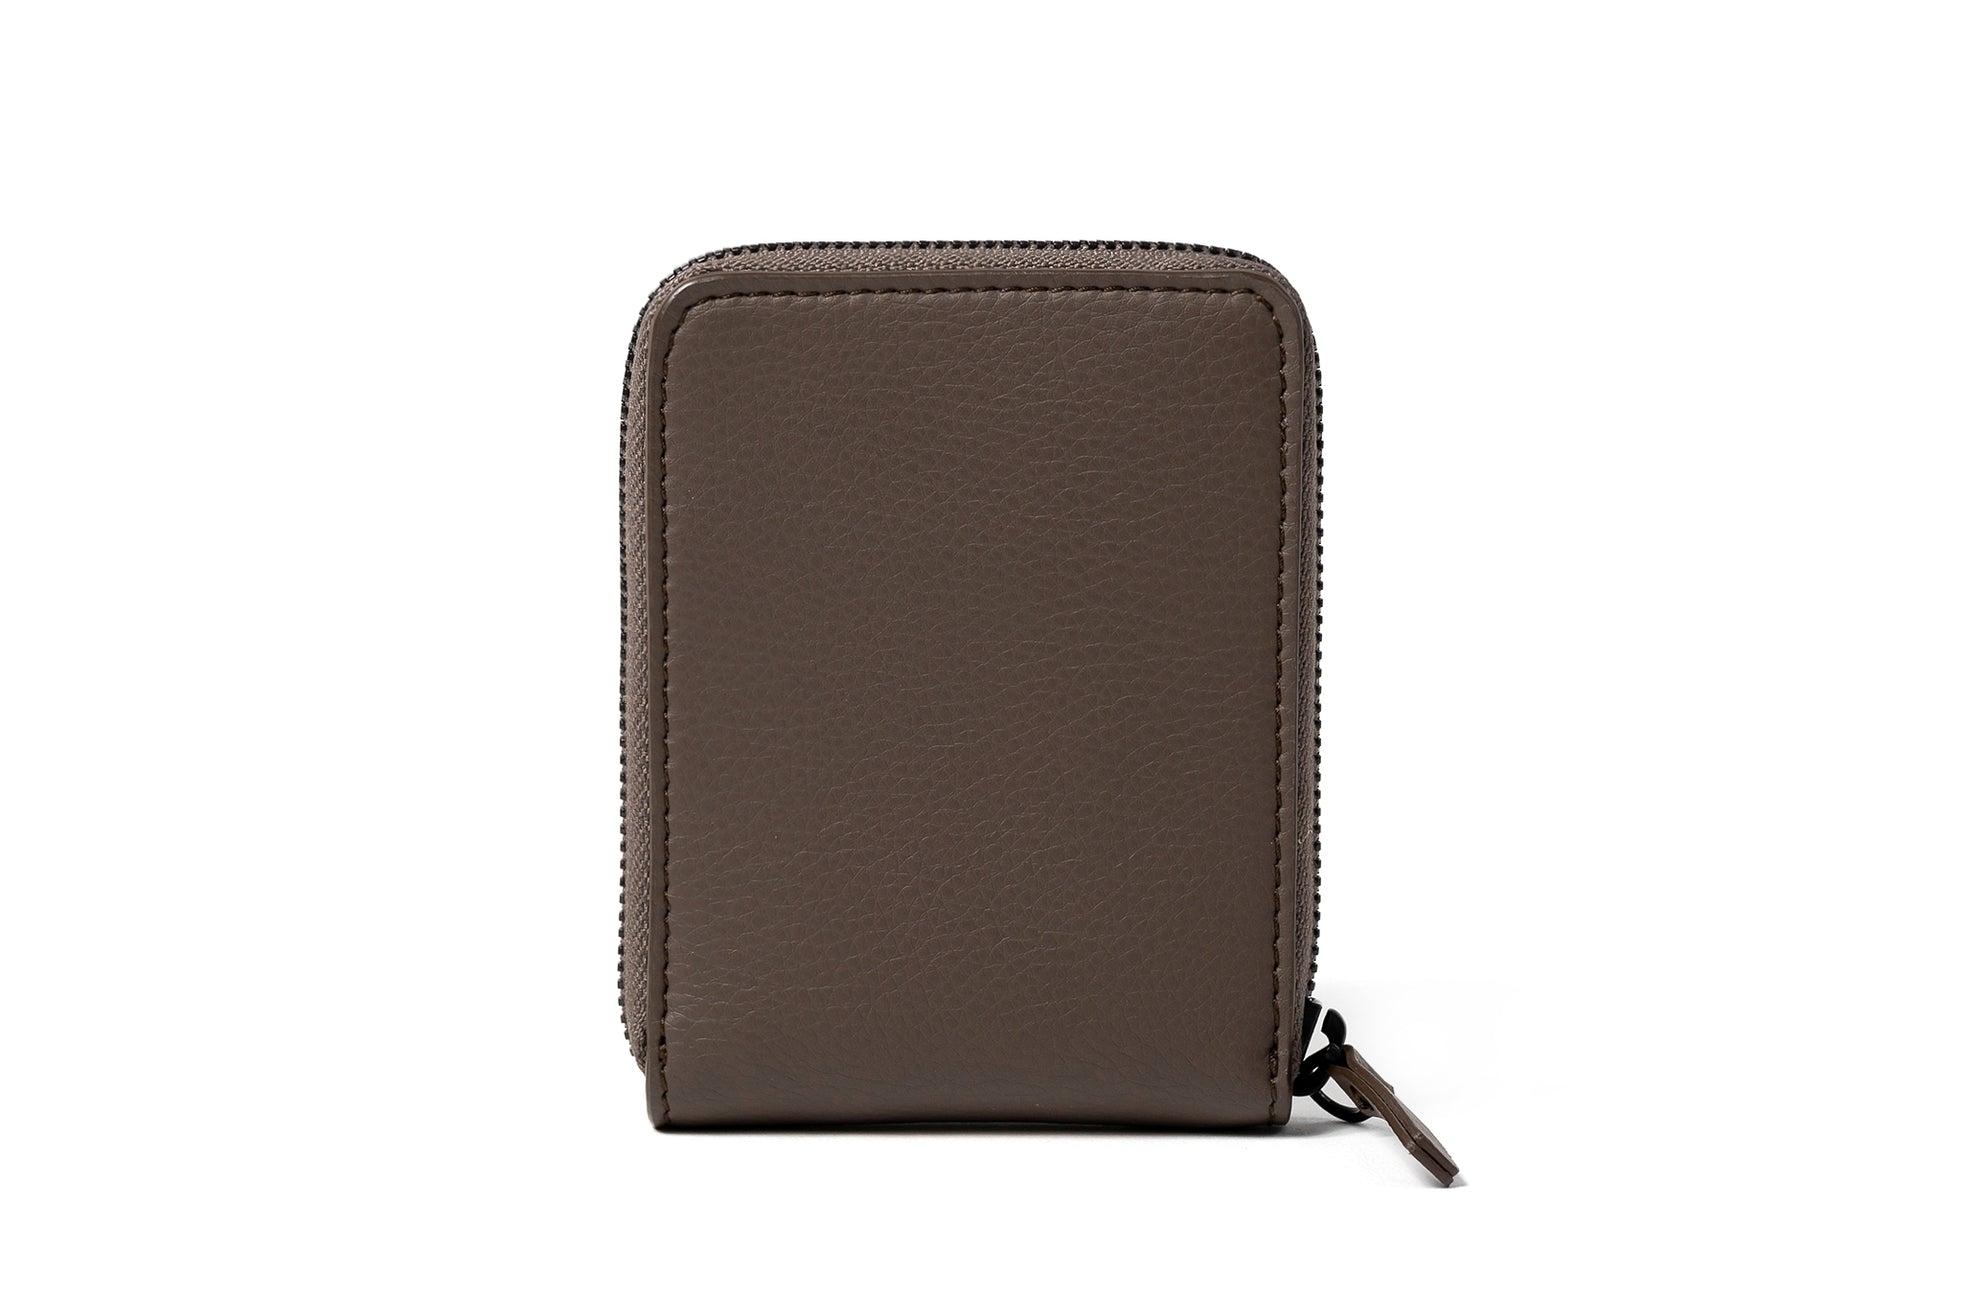 The Zip-Around Wallet in Technik-Leather in Taupe image 2